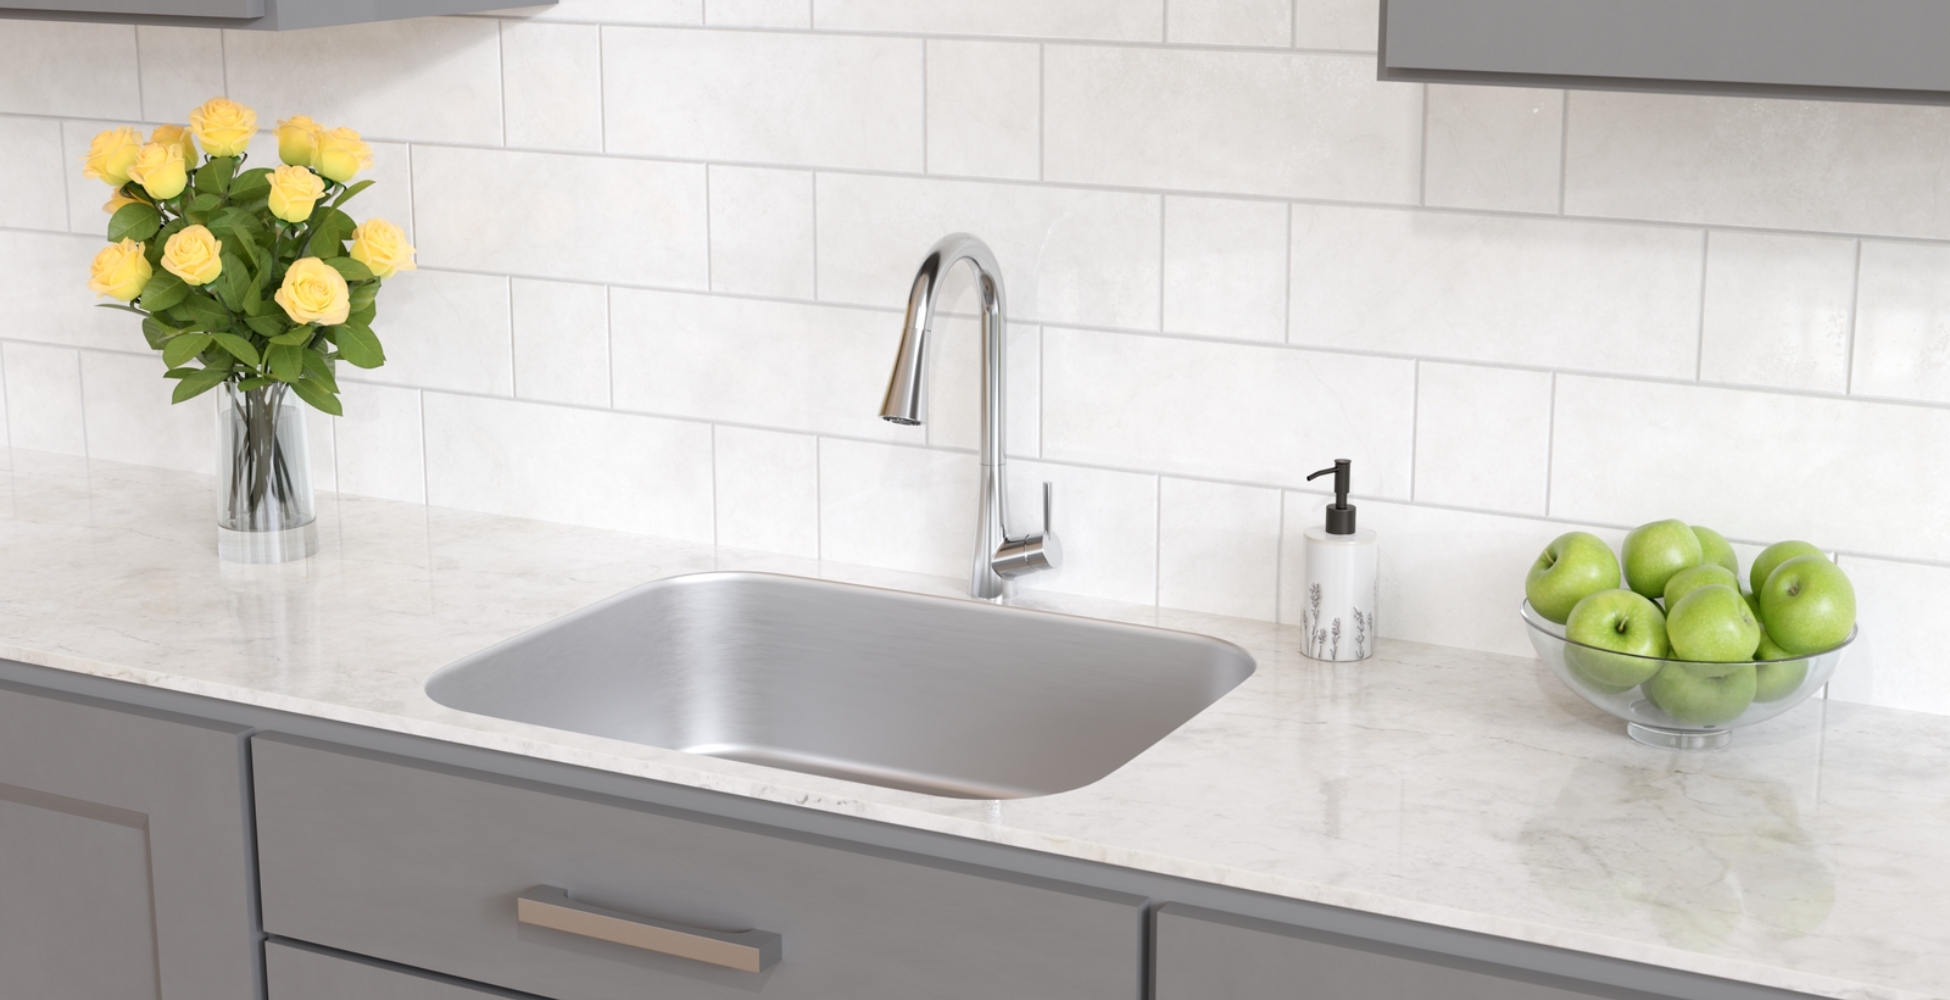 Olympia-i2-Kitchen-Faucet-K-5020-Lifestyle-Inspiration-3D-Artist-Connor-Davis-1.png